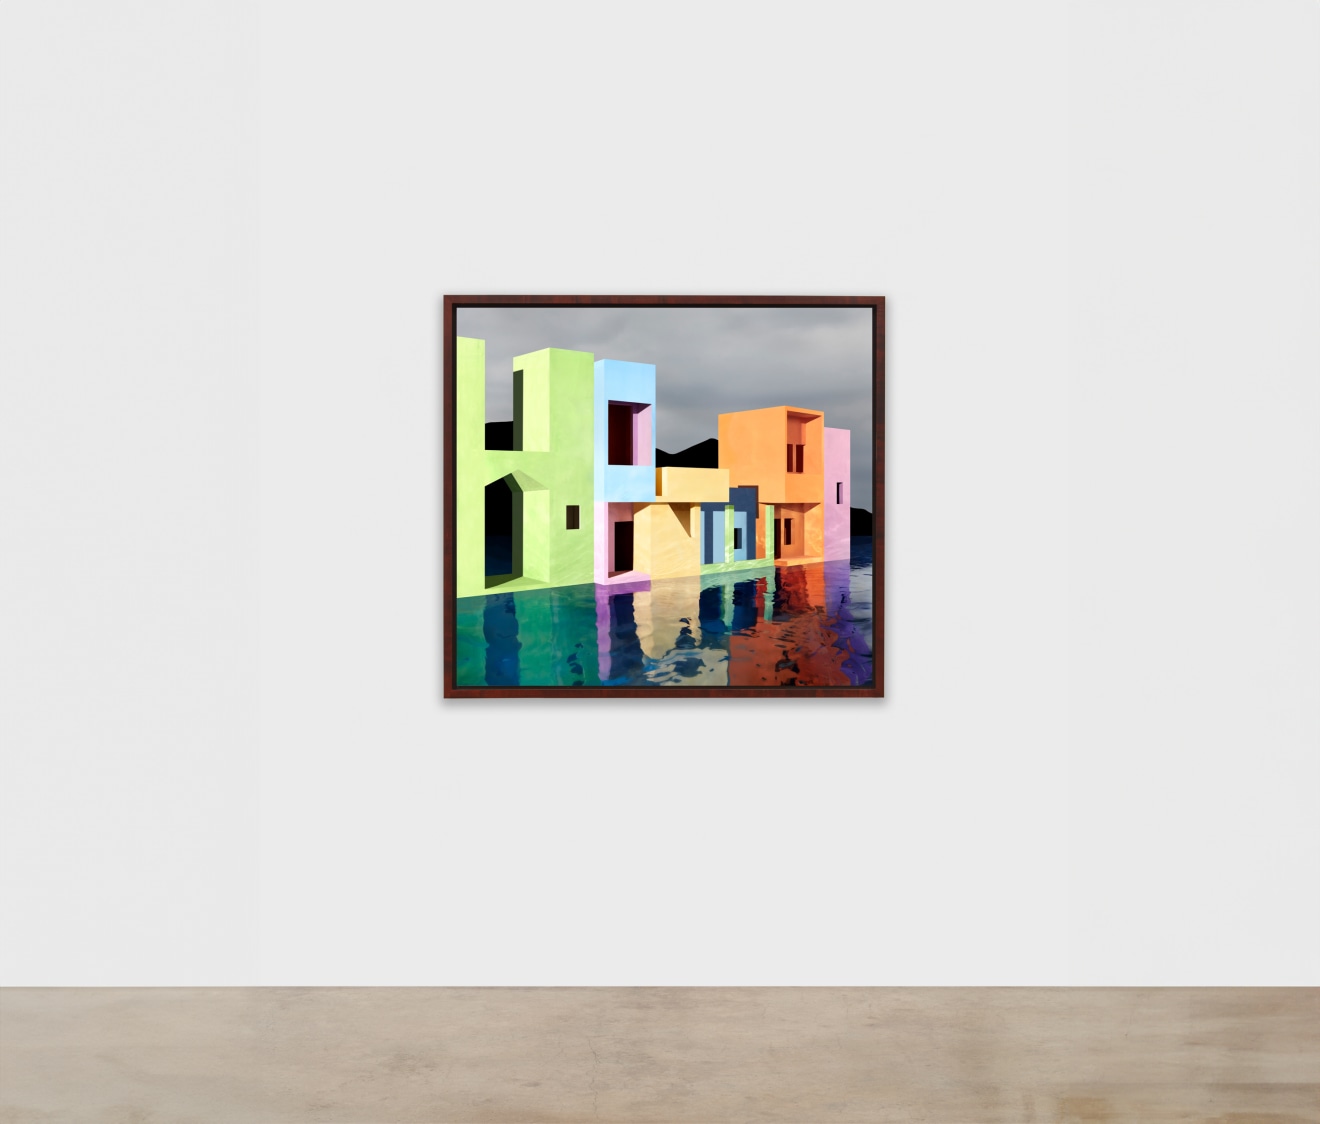 James Casebere, Balconies, 2023, framed archival pigment print mounted to Dibond, paper: 46 3/4 x 51 3/16 inches, framed: 49 1/2 x 53 15/16 x 2 1/4 inches &copy; James&nbsp;Casebere Courtesy: the artist and Sean Kelly, New York/Los Angeles